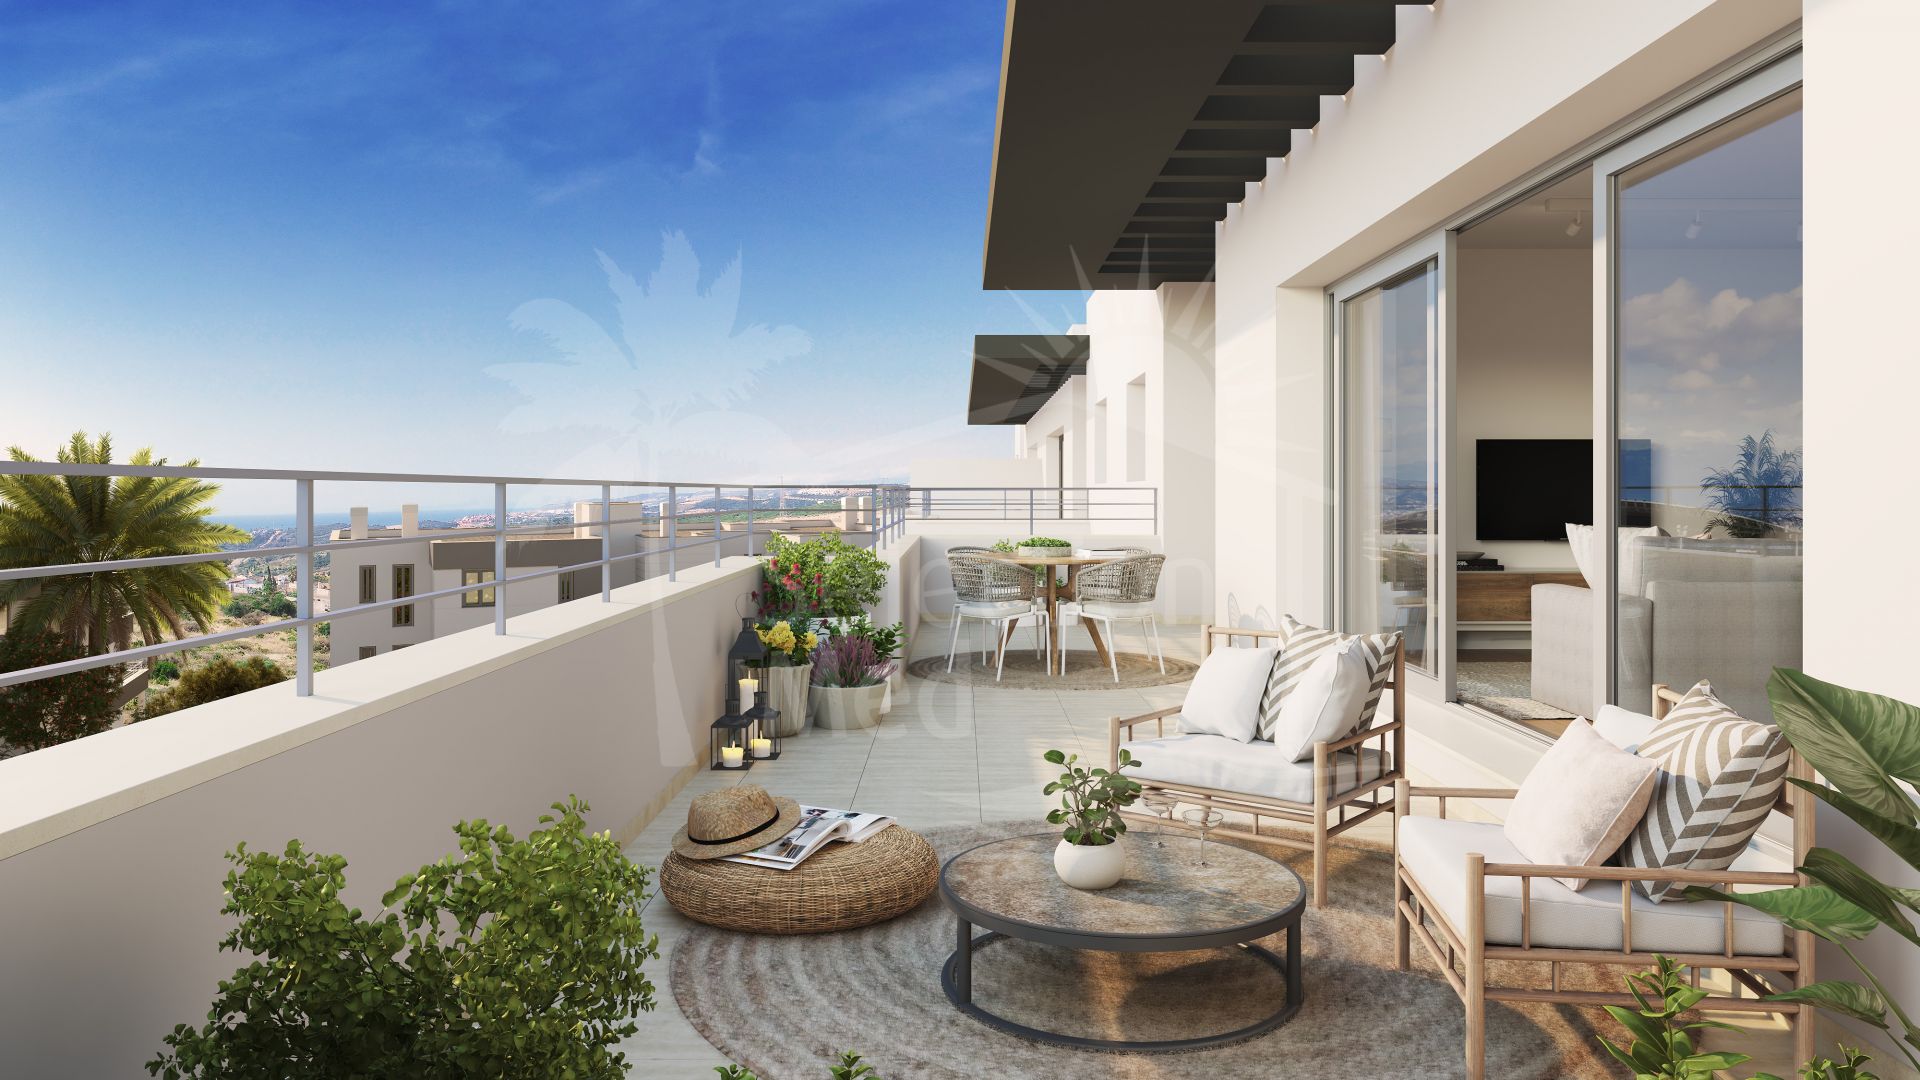 Brand New 2 Bedroom Apartment with Large Terrace in Valle Romano Estepona.